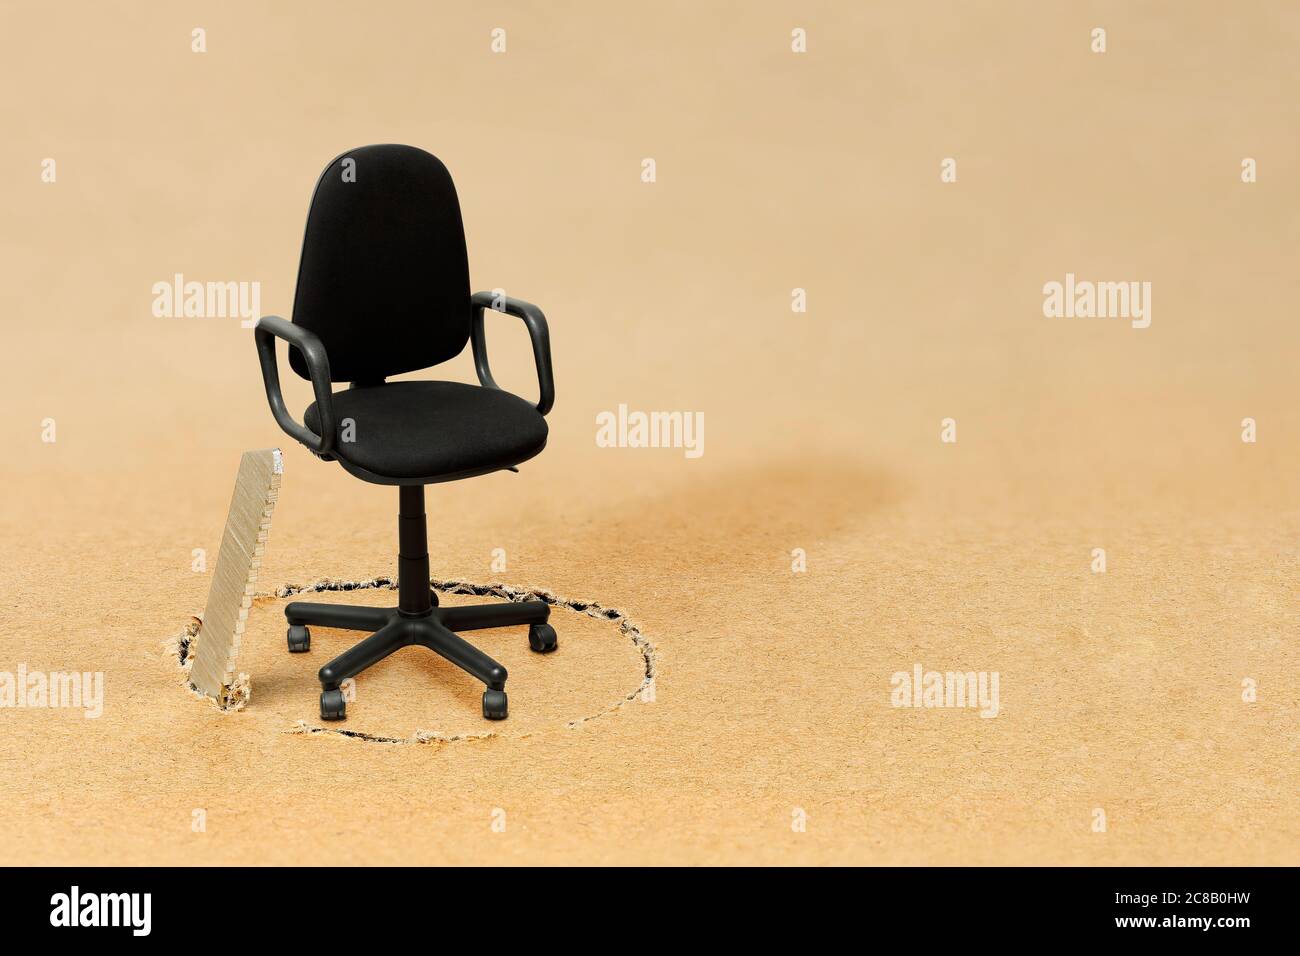 sawing the floor under an empty office chair, concept for undermining somebody's position Stock Photo